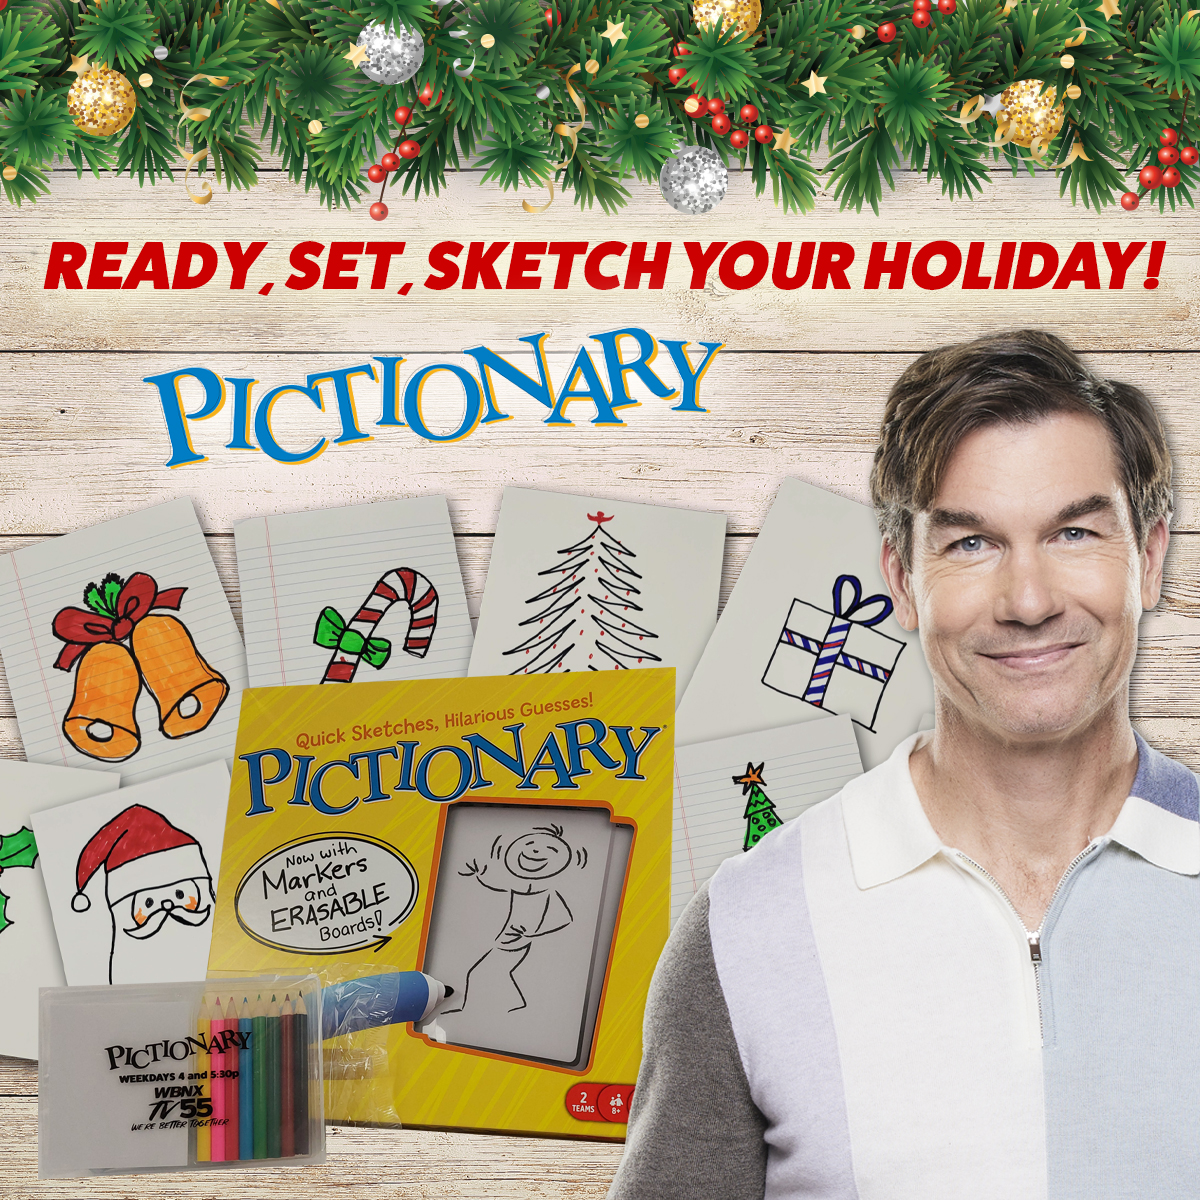 Pictionary Sketch Your Holiday Giveaway